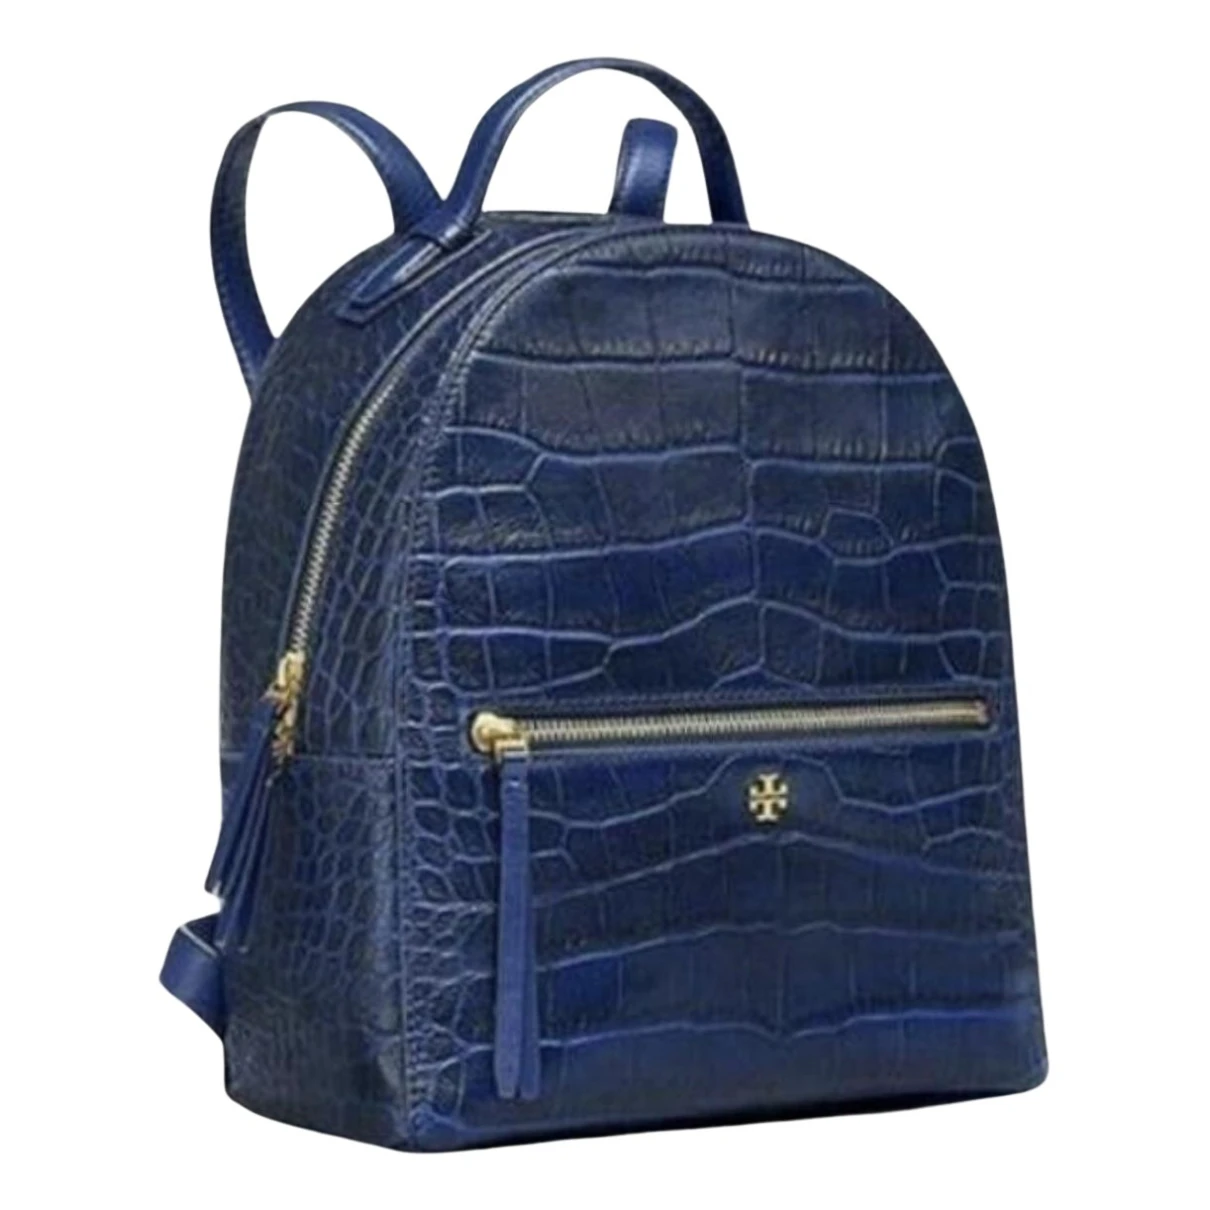 bags Tory Burch backpacks for Female Leather. Used condition